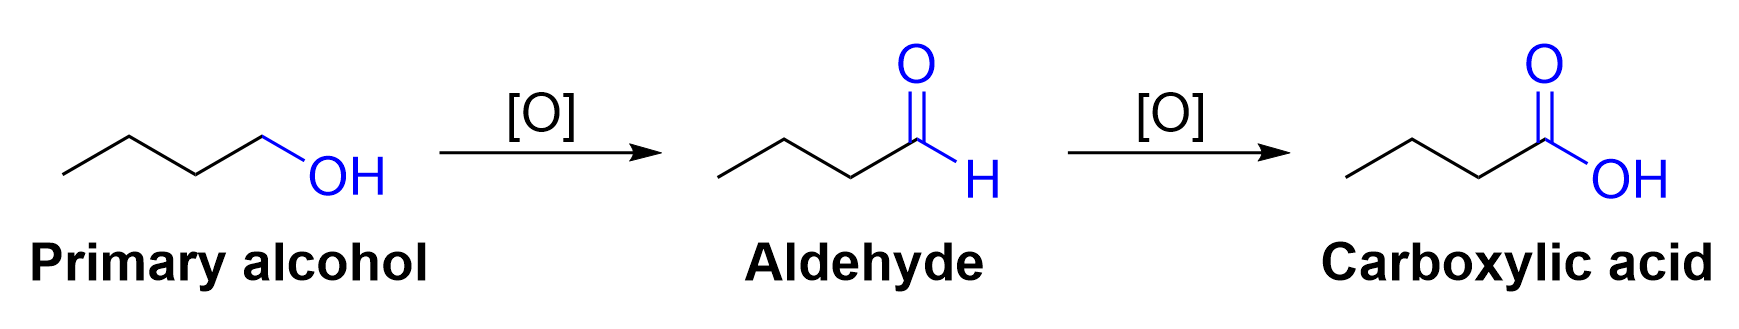 A primary alcohol undergoes oxidation, represented as [O] above the reaction arrow, to form an aldehyde. The aldehyde goes through a second oxidation and forms a carboxylic acid. In this example, butanol turns into butanal and then butanoic acid.